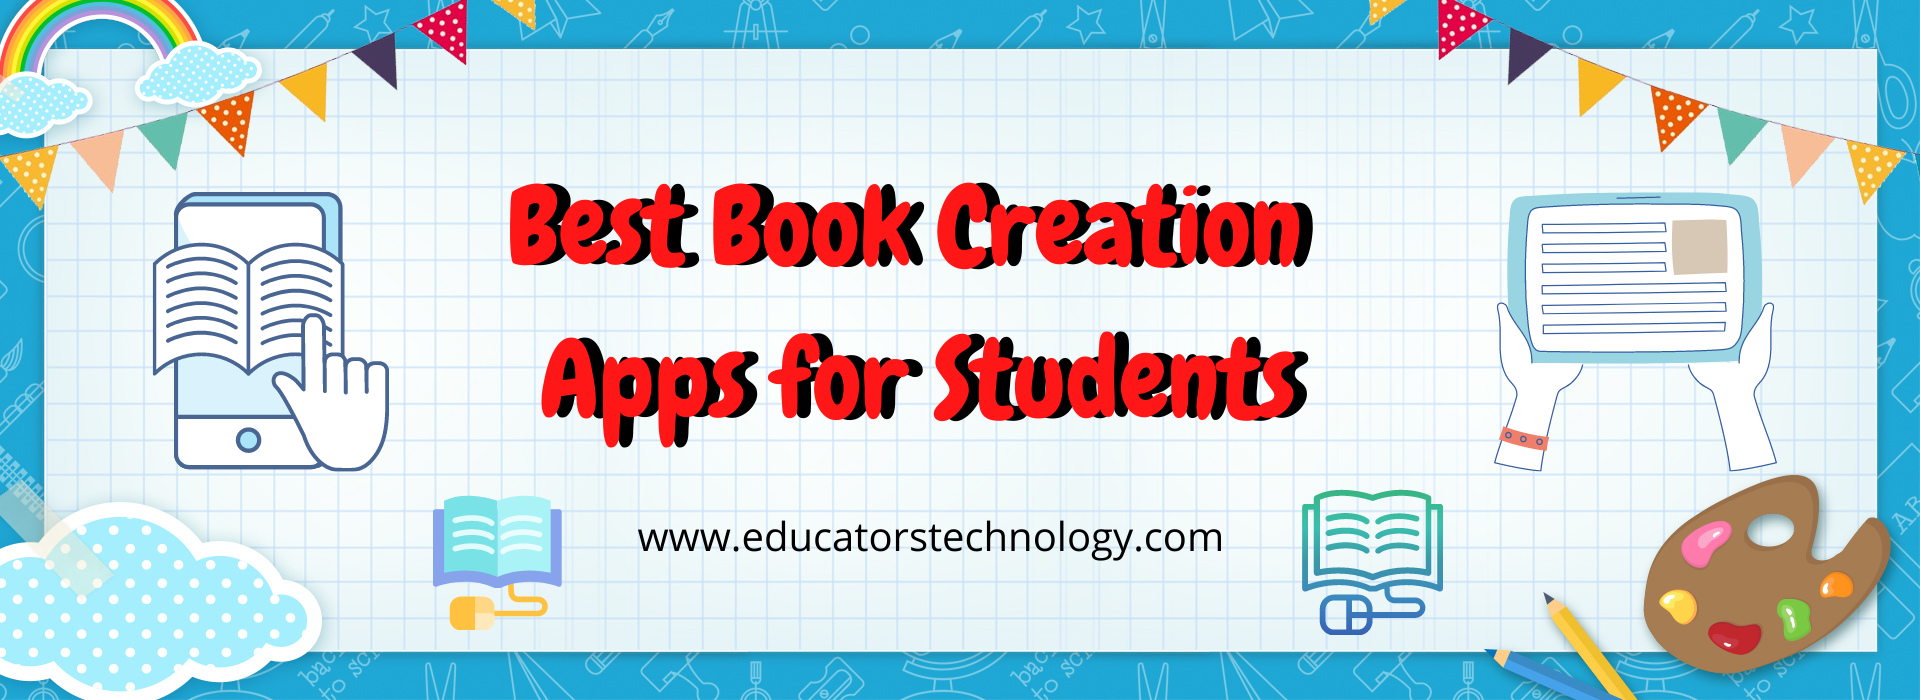 free apps for students to make book reviews android